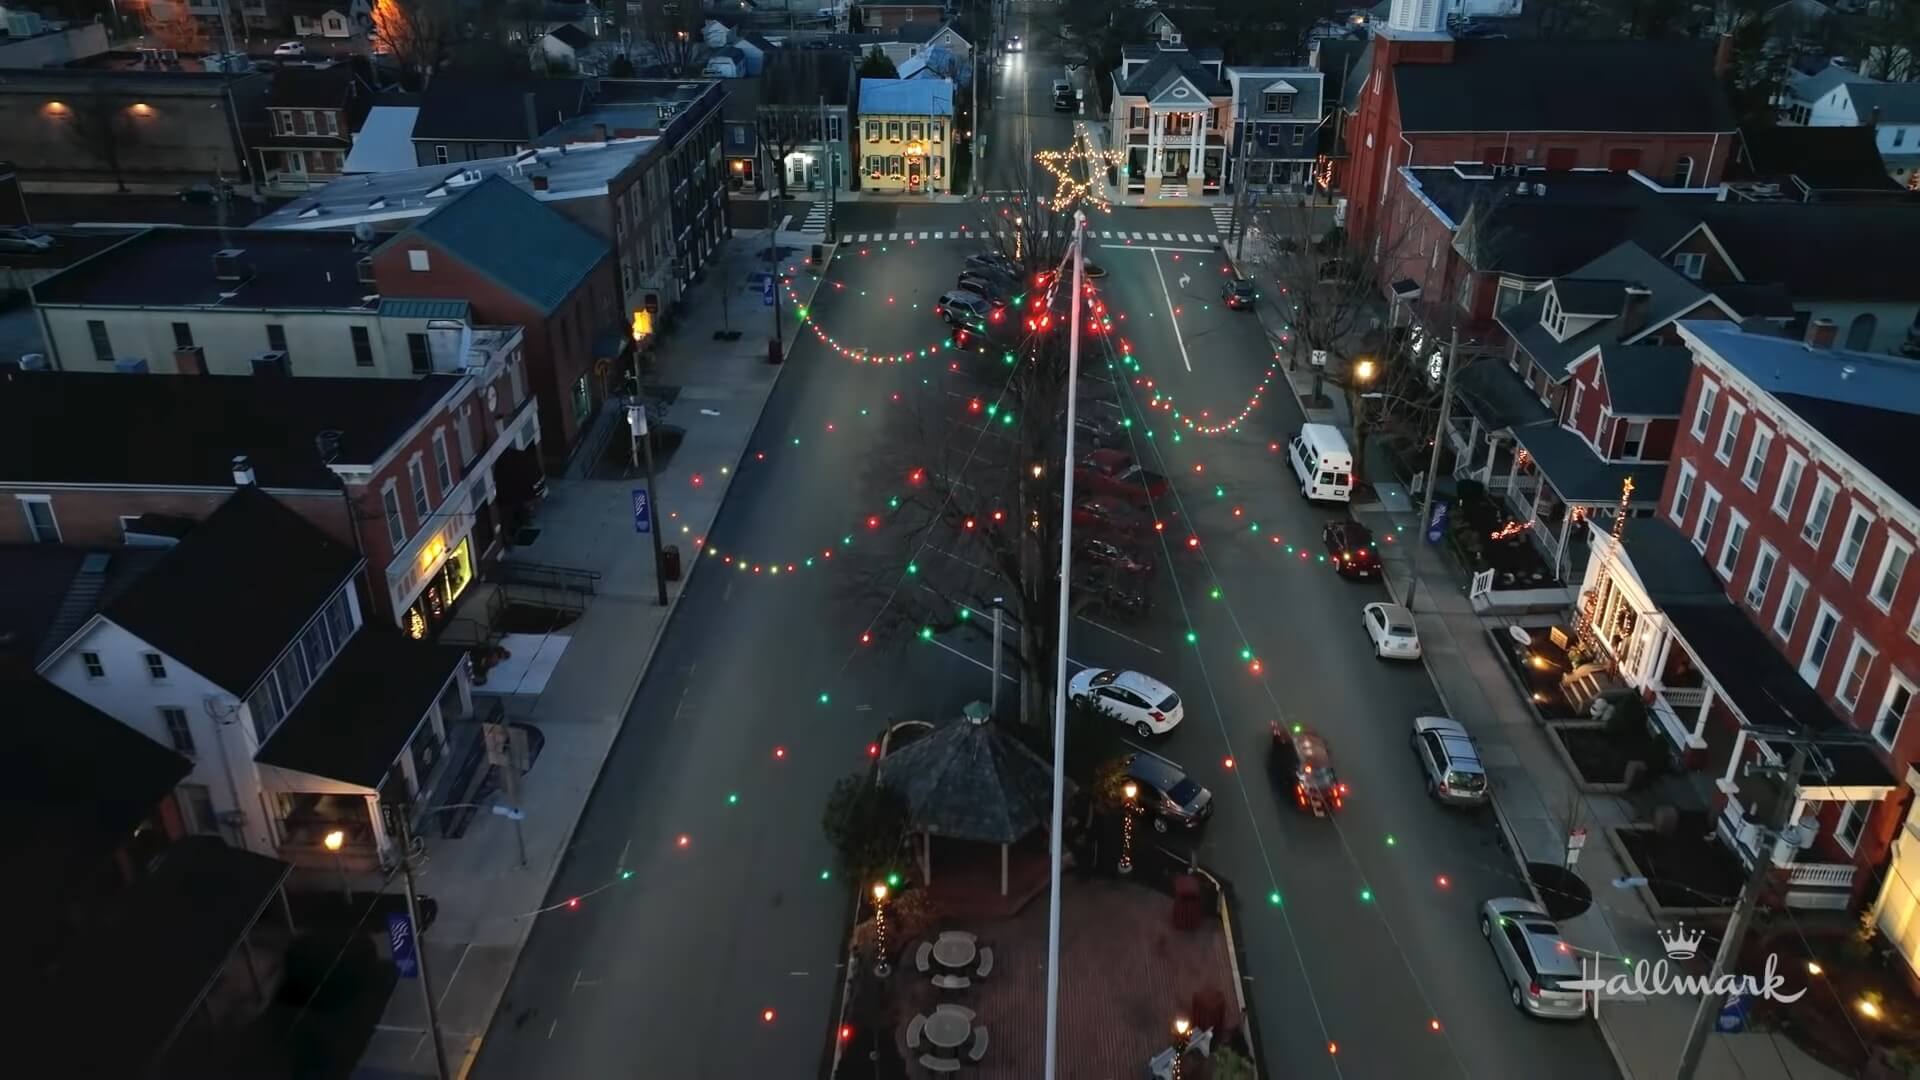 My Southern Family Christmas Filming Locations